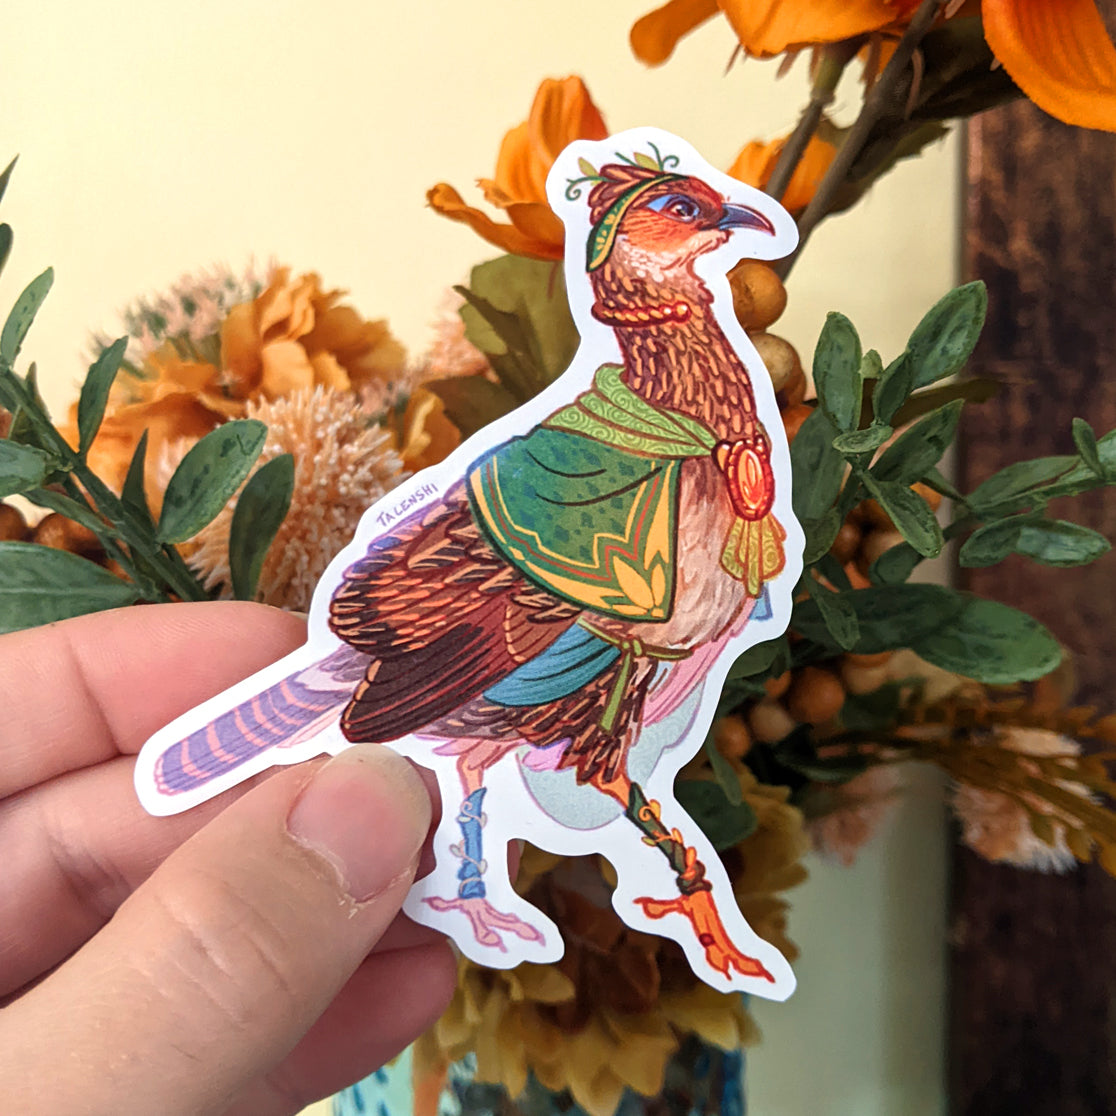 All Birbfest Large Stickers (6 total)